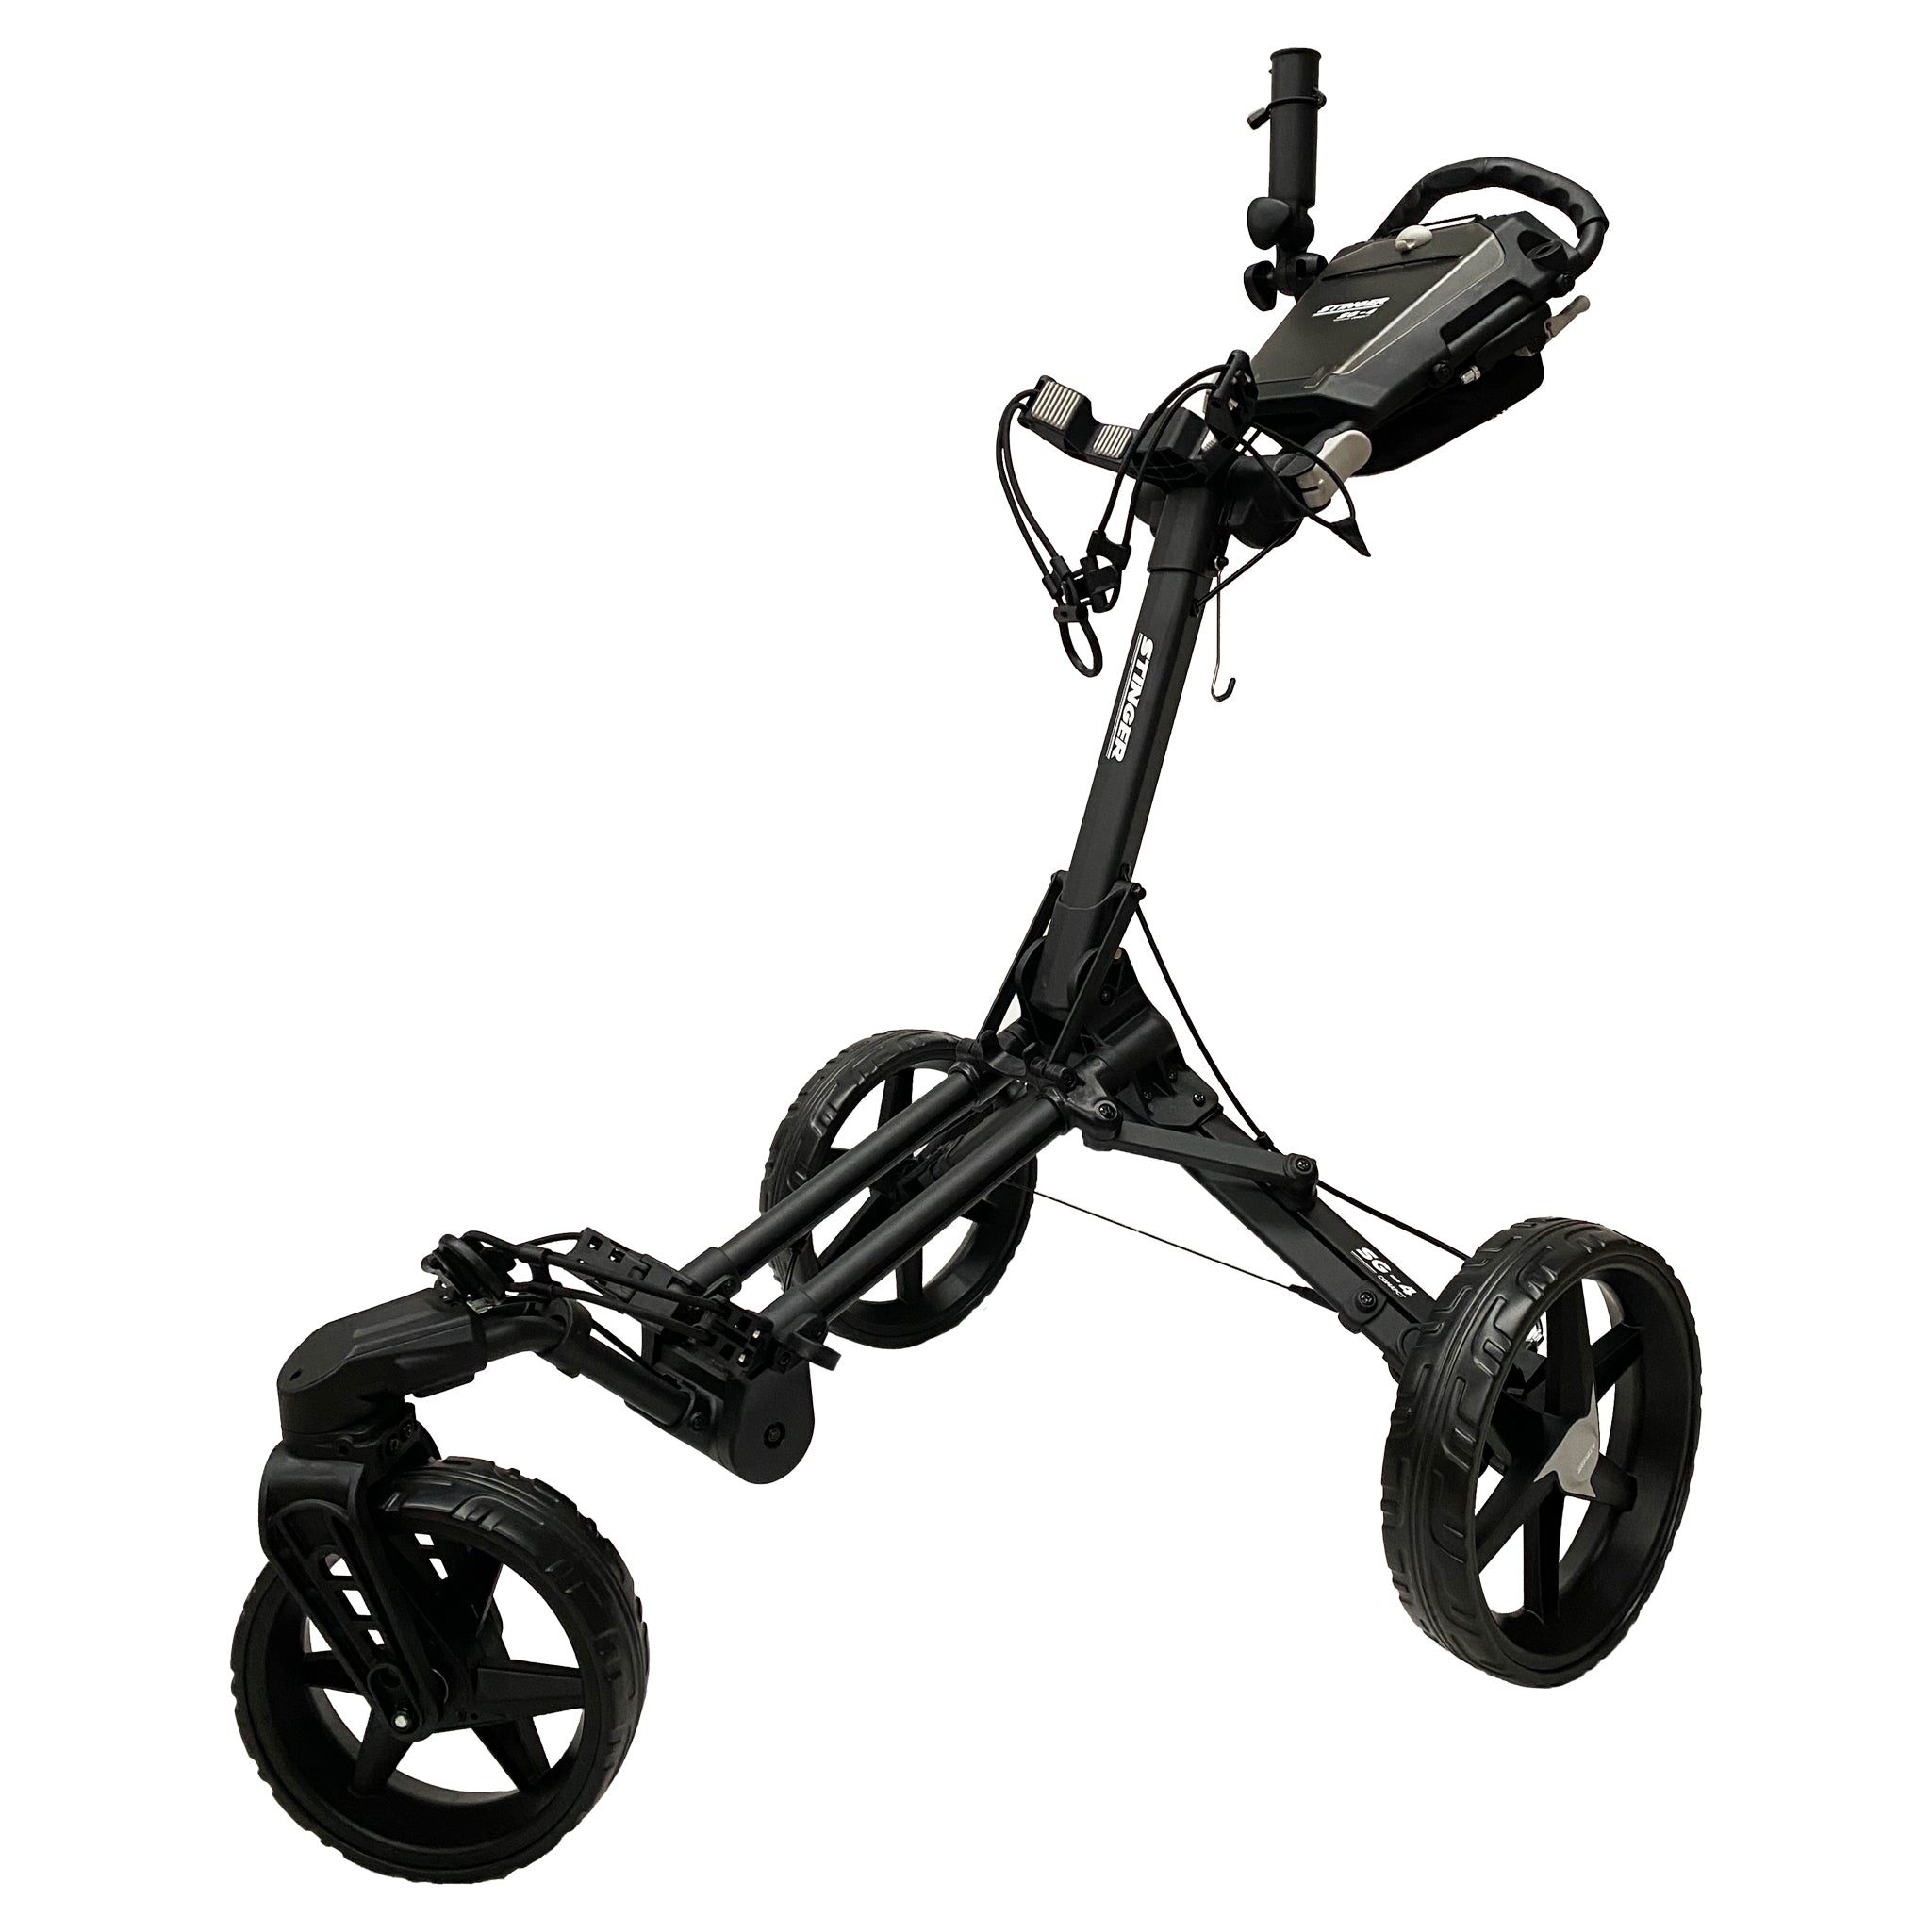 Introducing the SG-4 Compact Push Buggy: Unleash the Ultimate Power for your Golf Game!